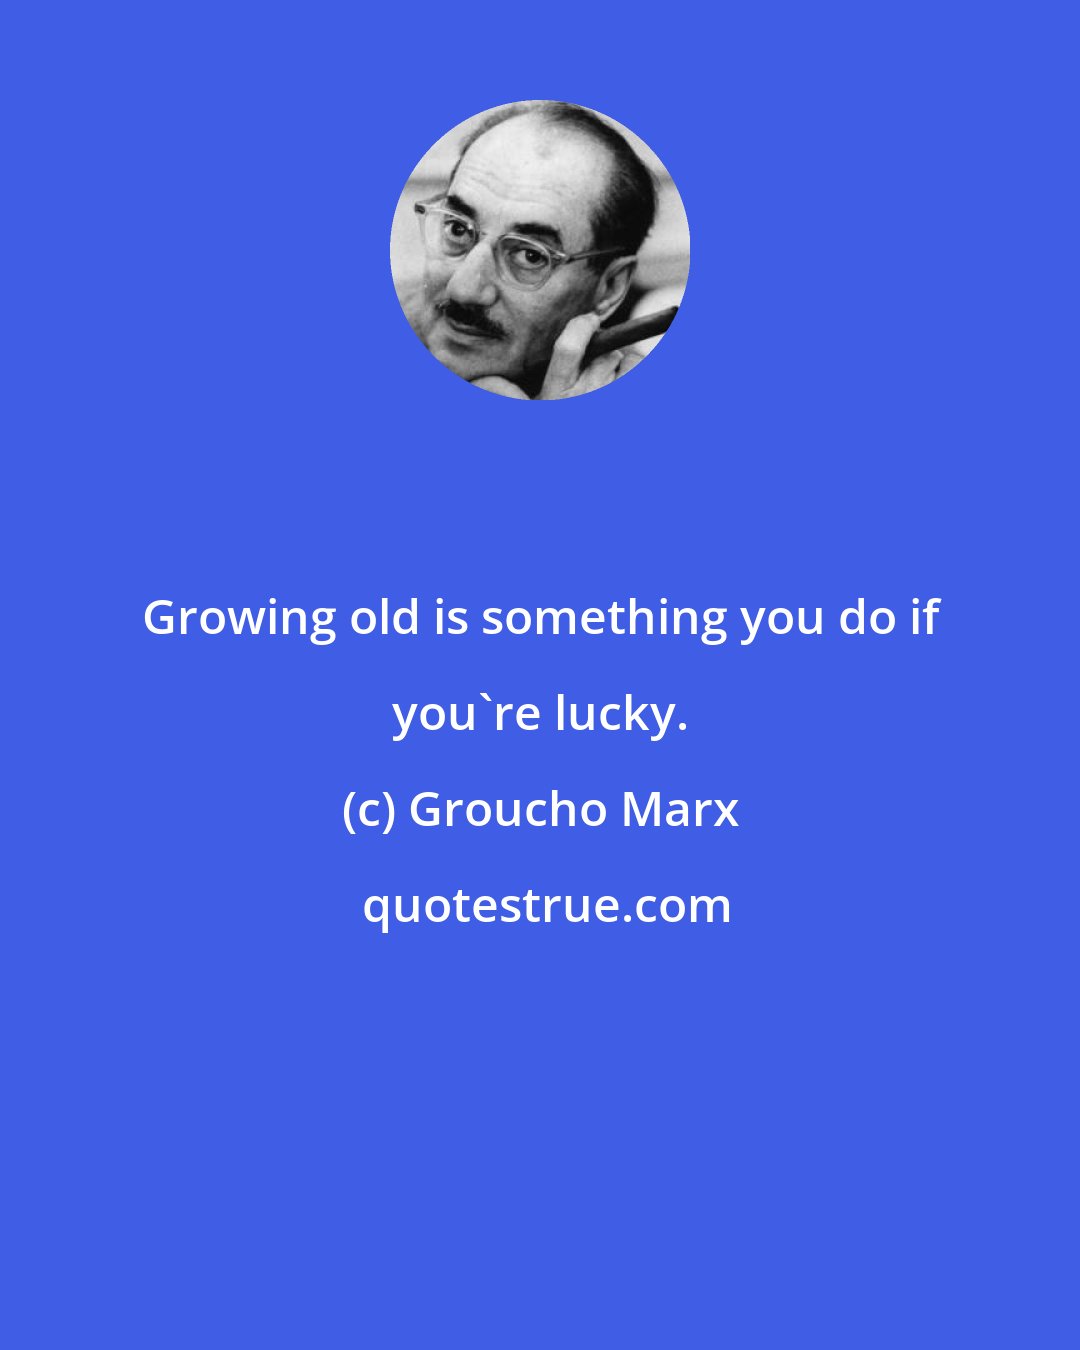 Groucho Marx: Growing old is something you do if you're lucky.